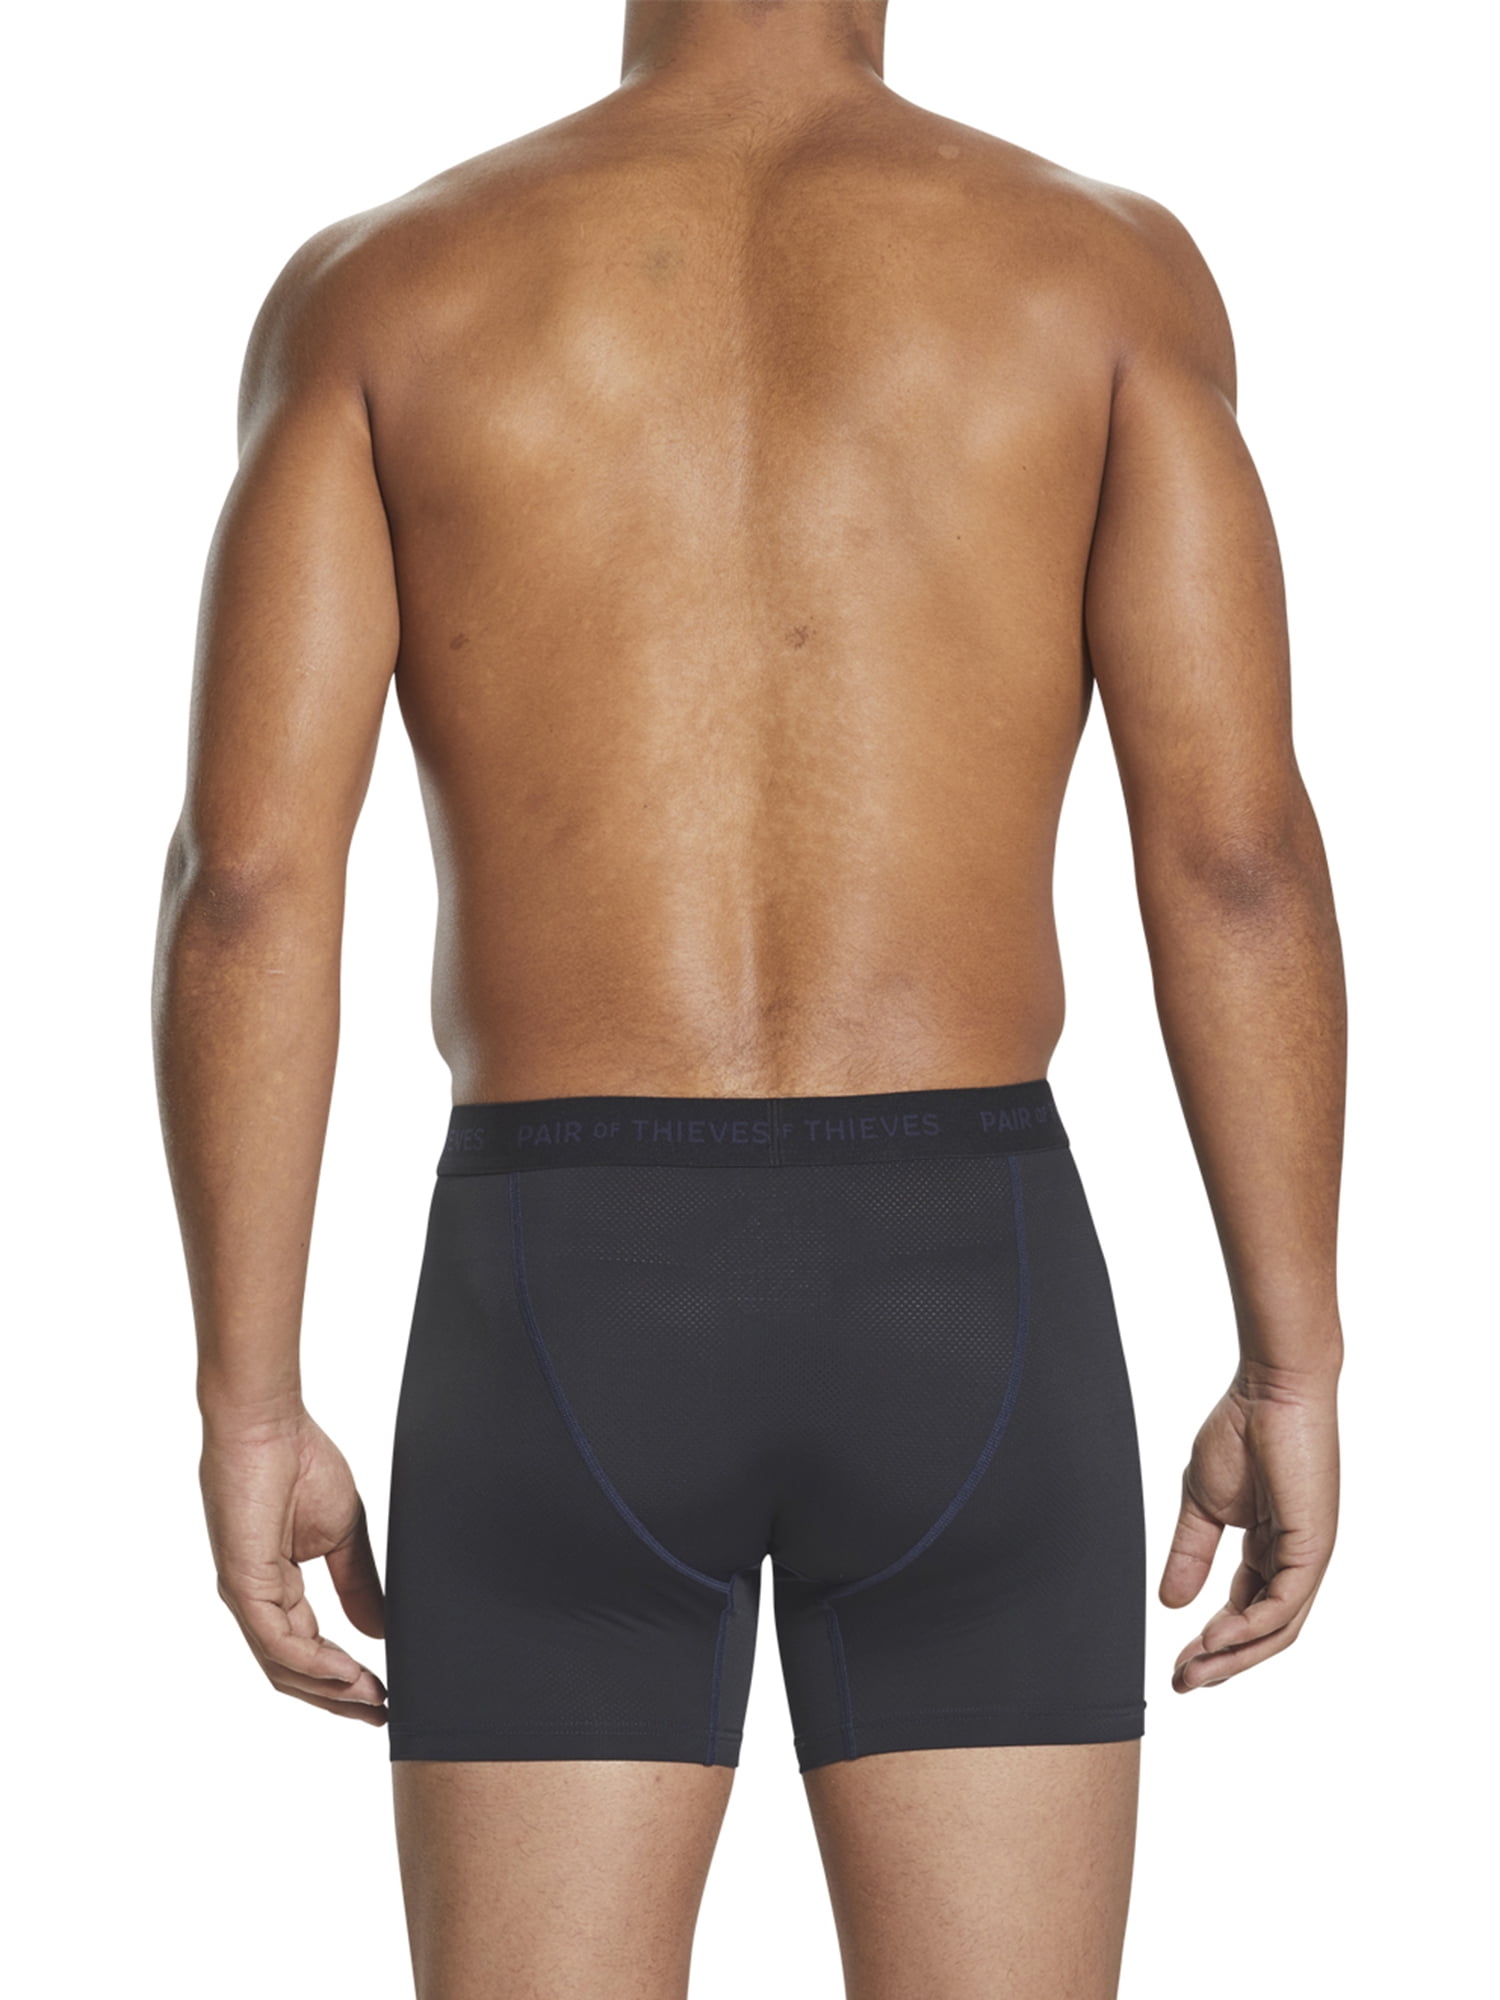 YMMV but Pair of Theives super fit boxer briefs for $5 at Walmart